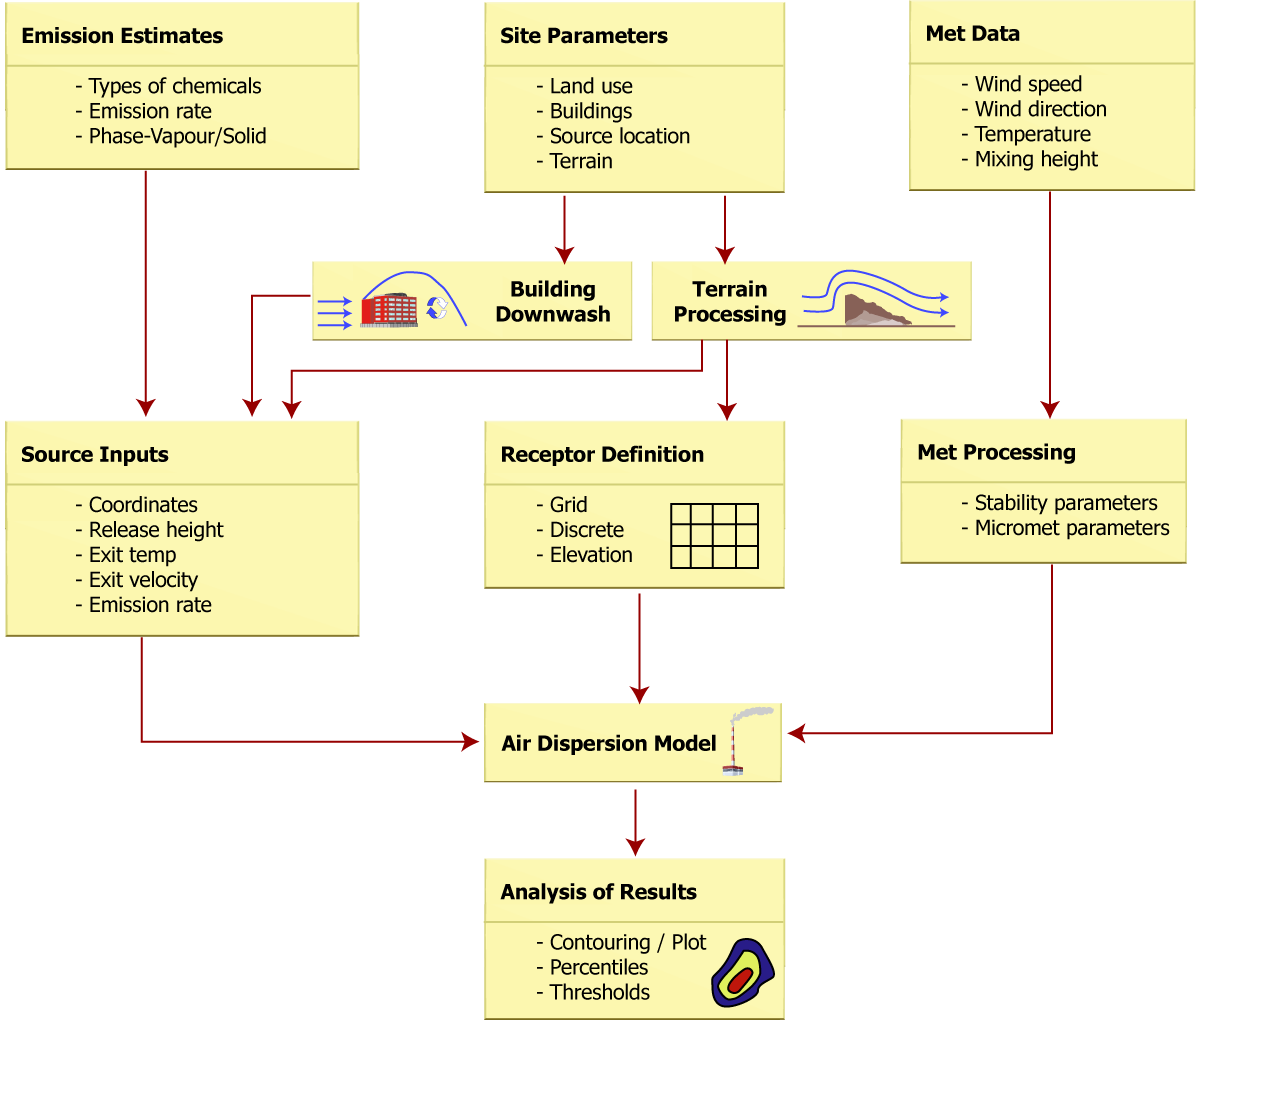 A flowchart illustrating a general overview of the process typically followed for performing an air dispersion modelling assessment. The flowchart contains flow-line connected boxes depicting individual elements of the process as described above: Emission Estimates→Source Inputs; Site Parameters→Building Downwash and Terrain Processing→Source Inputs and Receptor Definition; Met Data→Met Processing; Terrain Processing. These all feed in as inputs to the Air Dispersion Model, which then feeds into the Analysis of Results box.